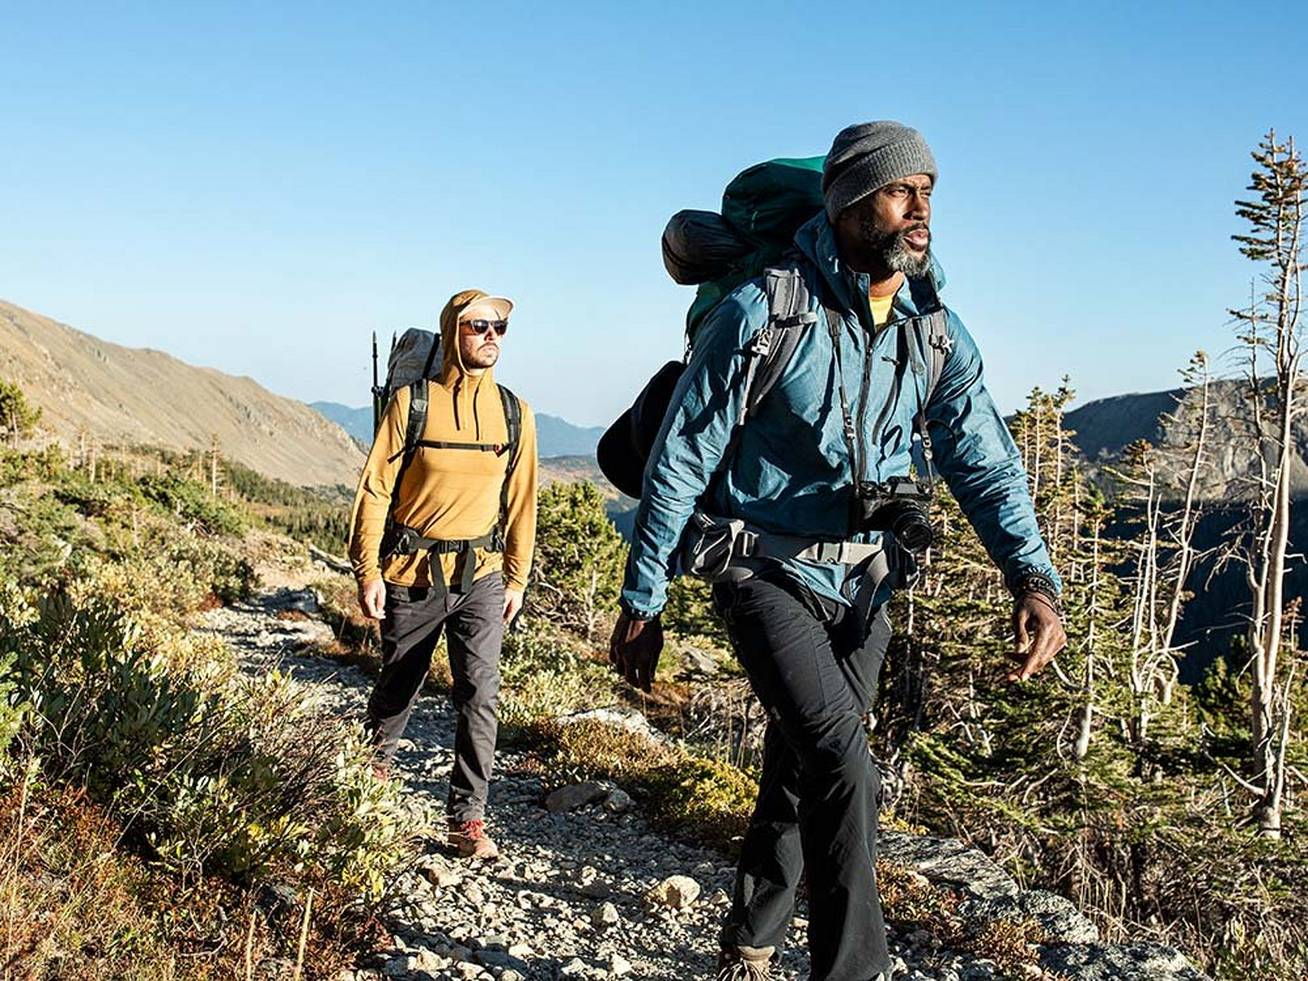 Men with hiking gear